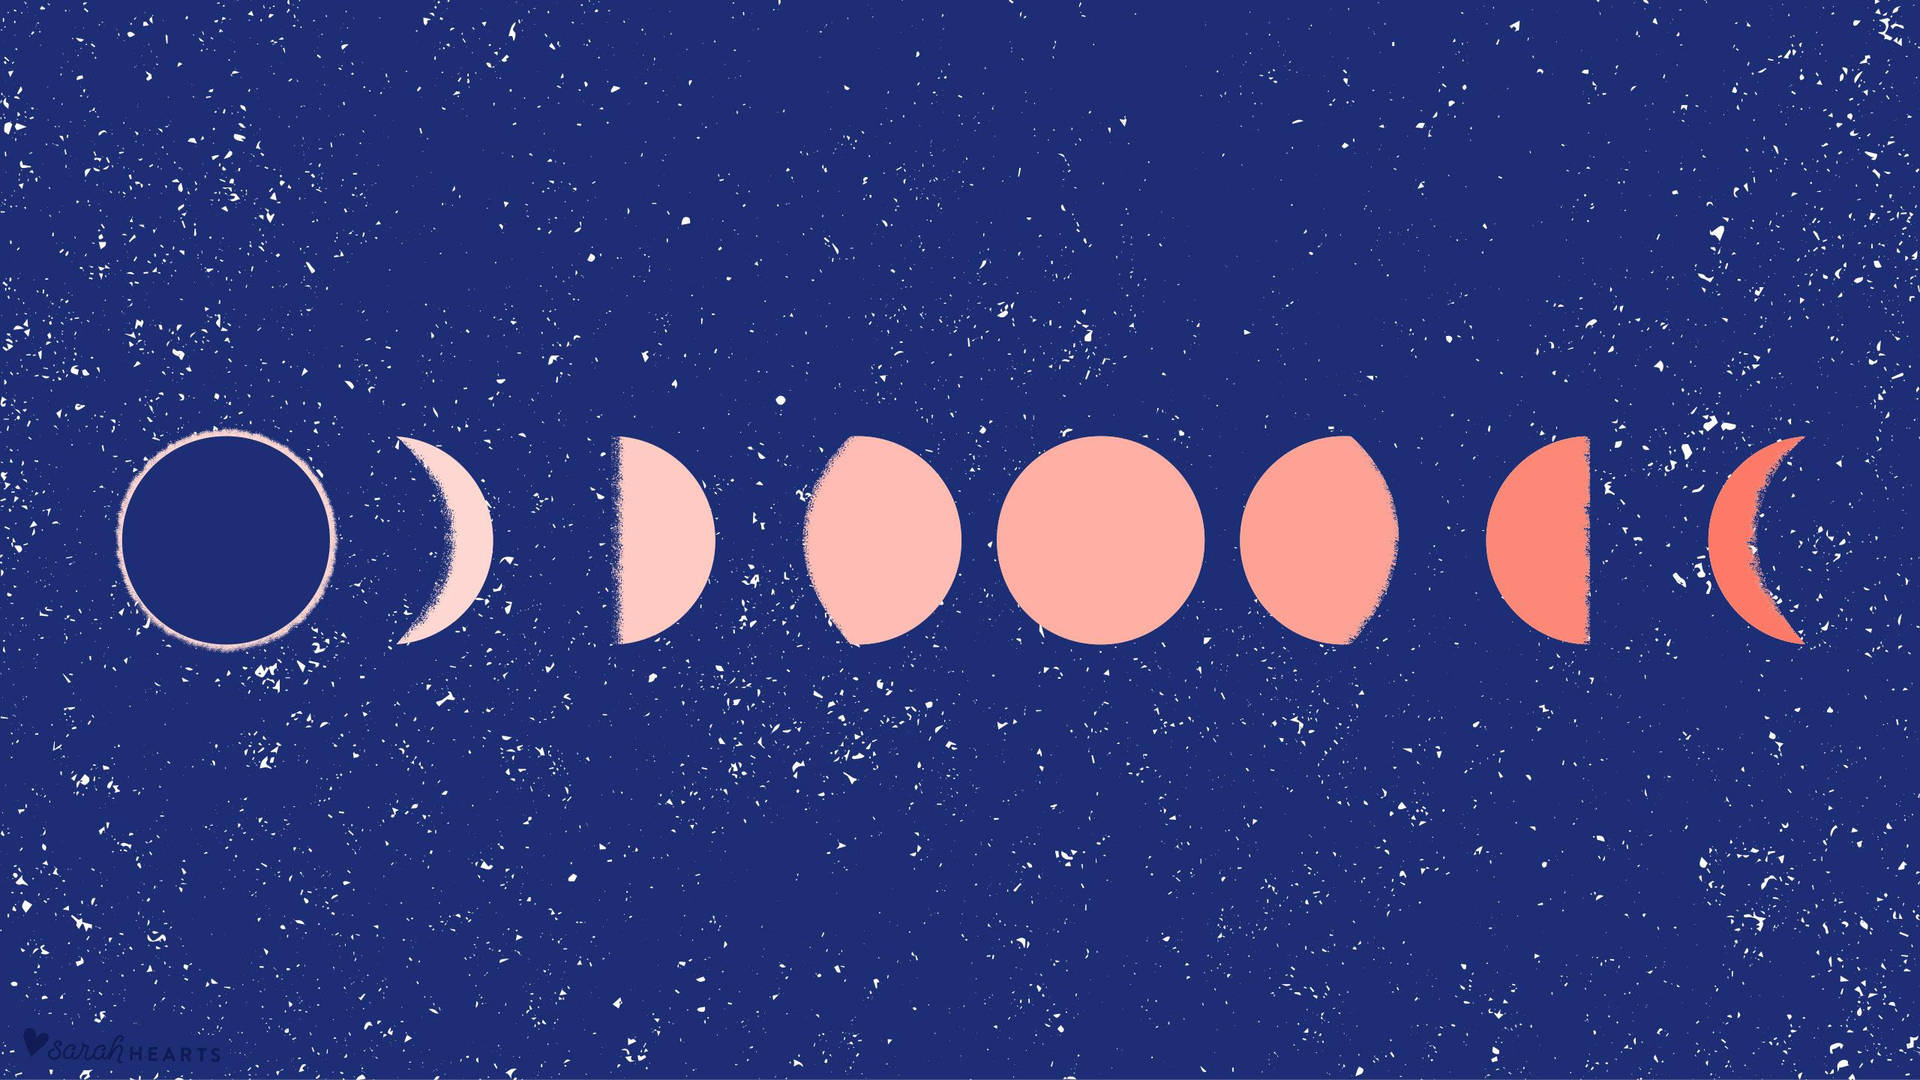 Neutral-colored Moon Phases Wallpaper